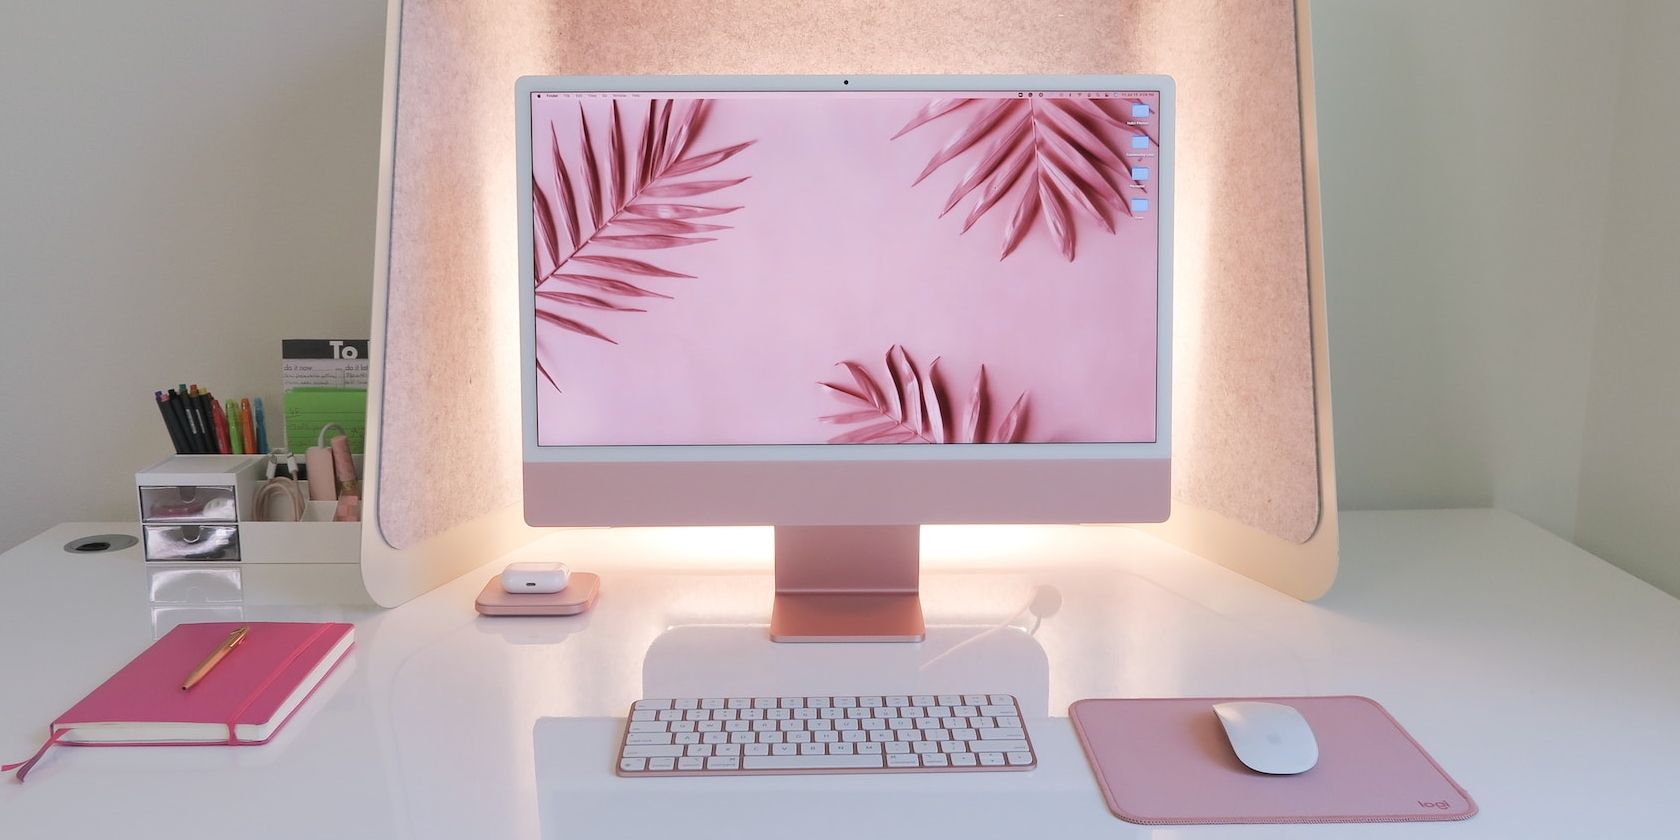 iMac on a desk with pink aesthetic